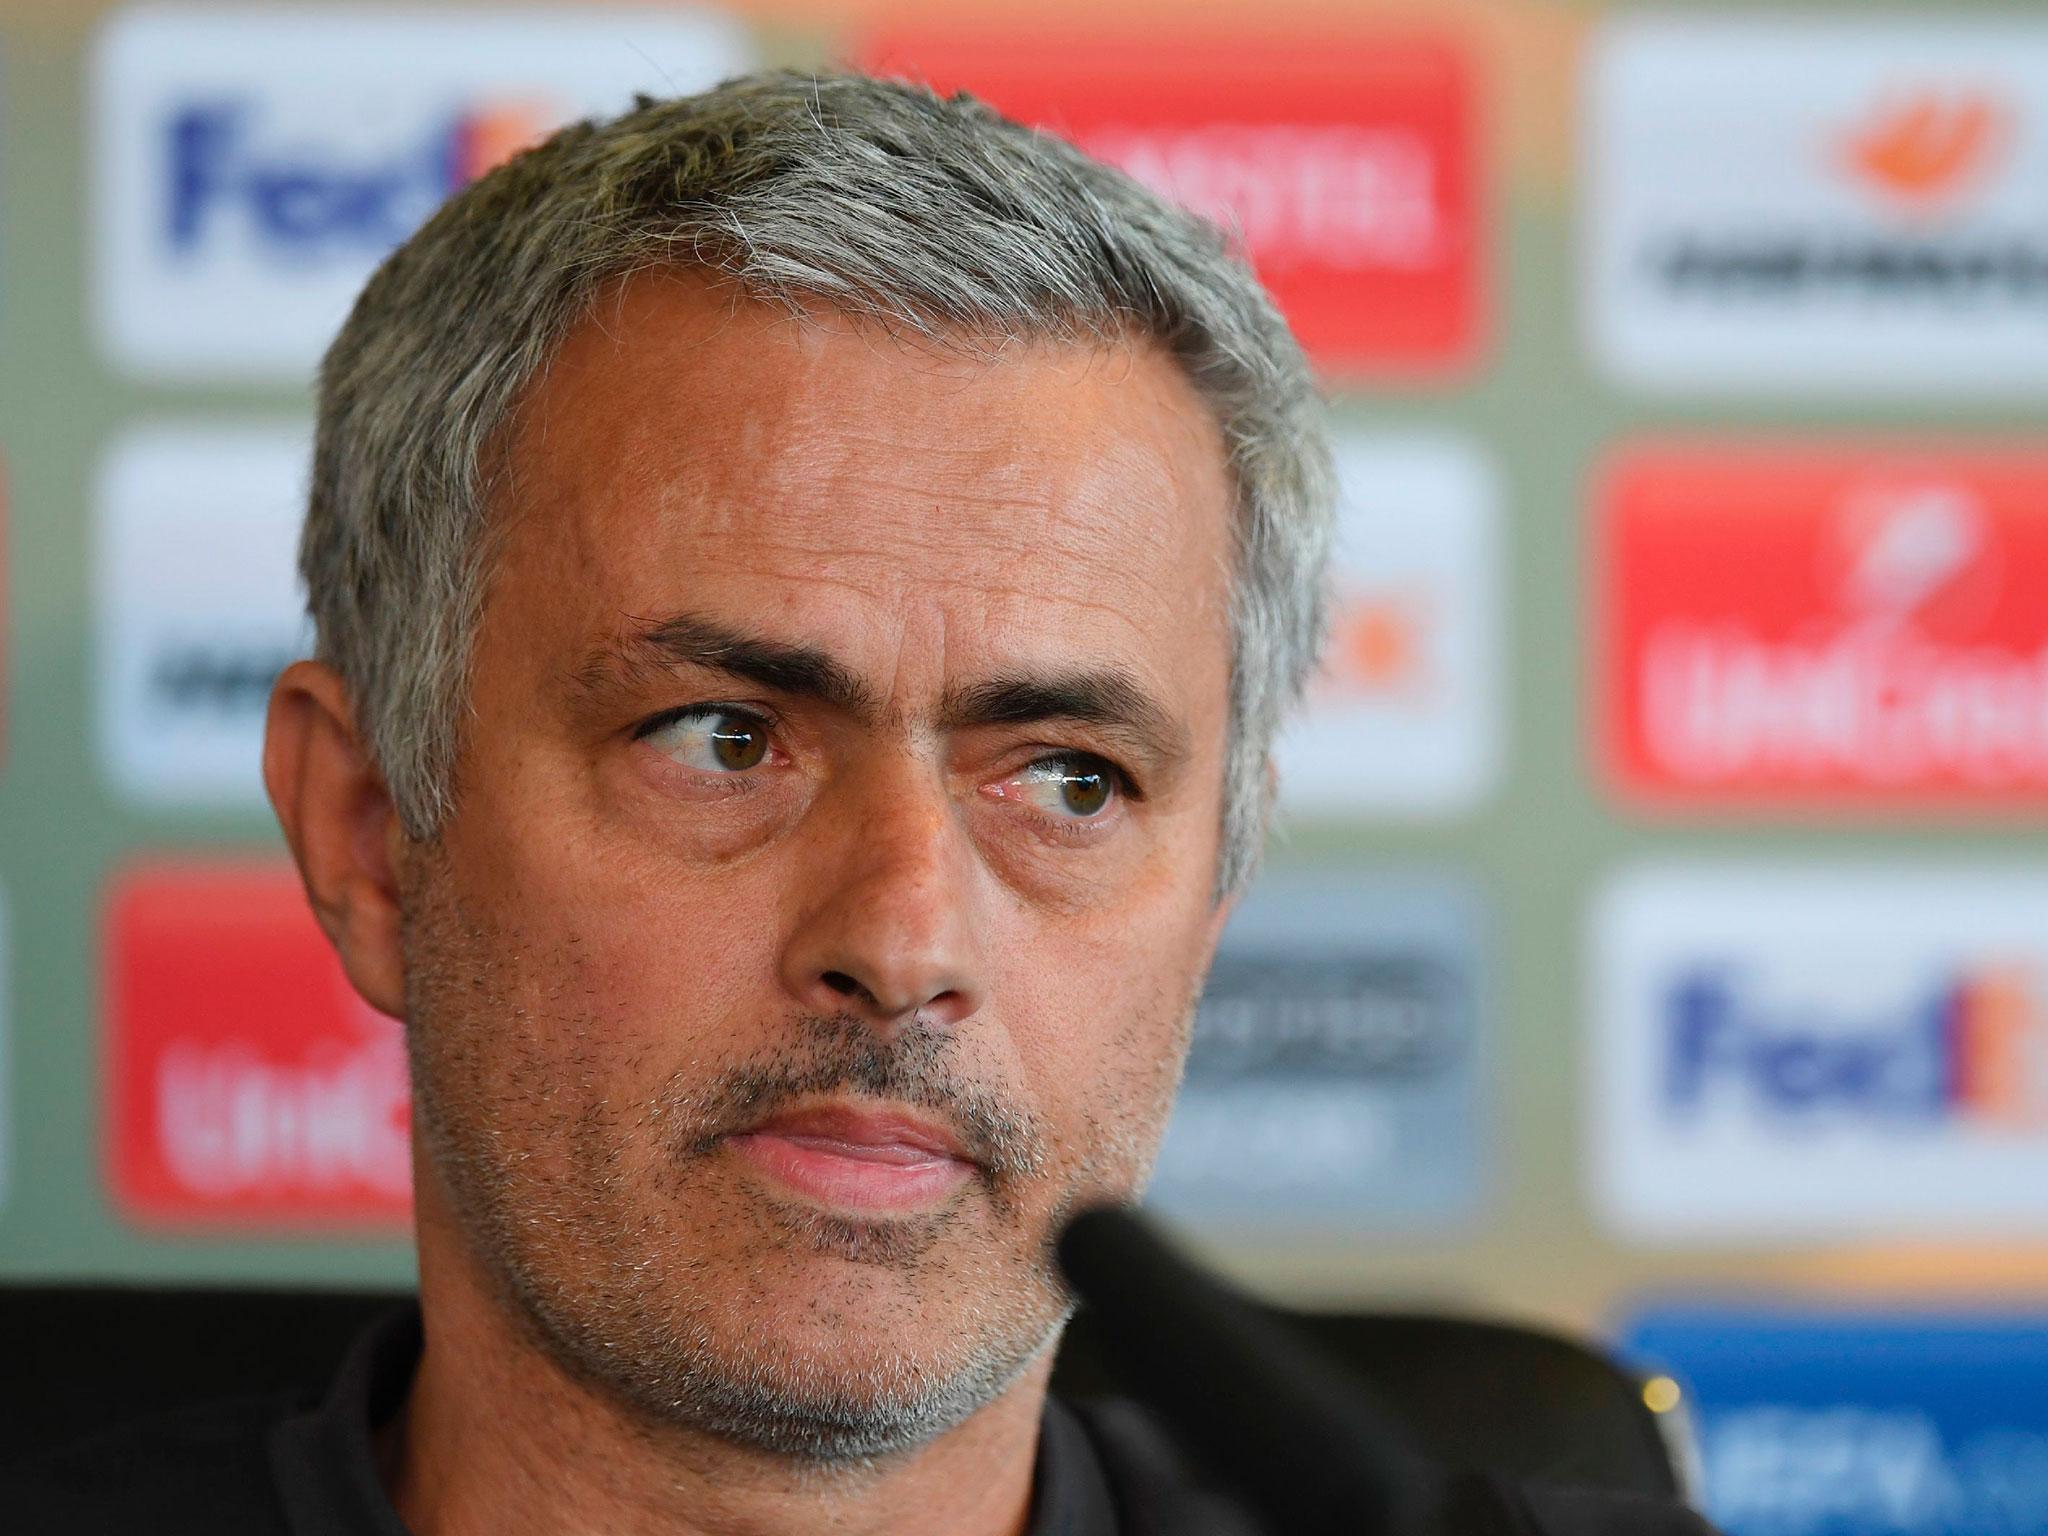 Jose Mourinho wants Manchester United to finish the season strong